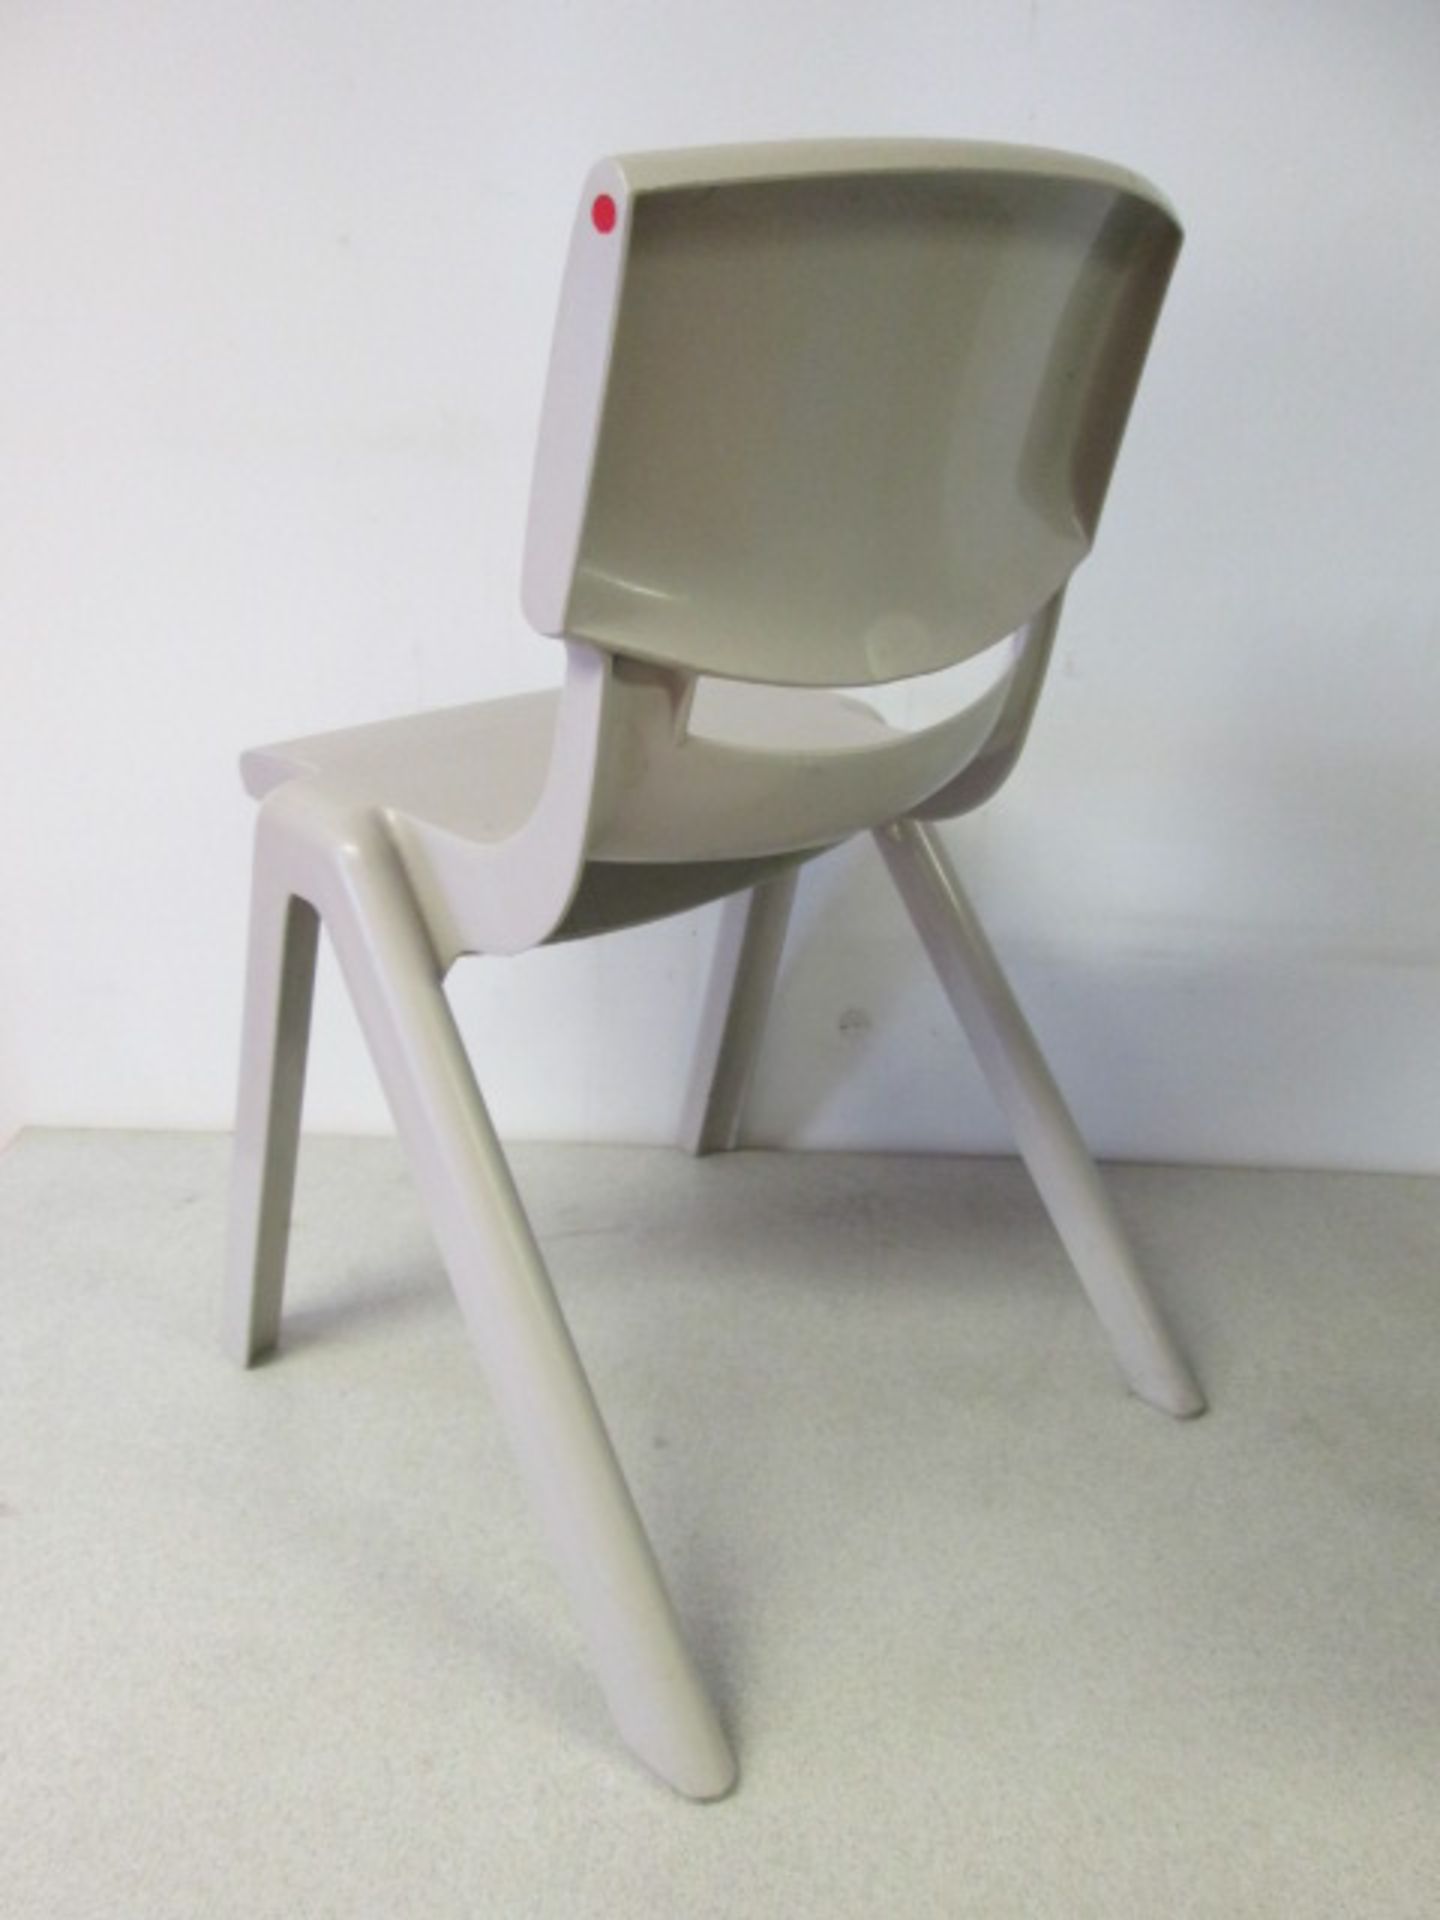 25 x Sebel Postura, Children's Classroom Stacking Chairs in Light Grey (Size 4). Size (H) 67cm x (W) - Image 3 of 4